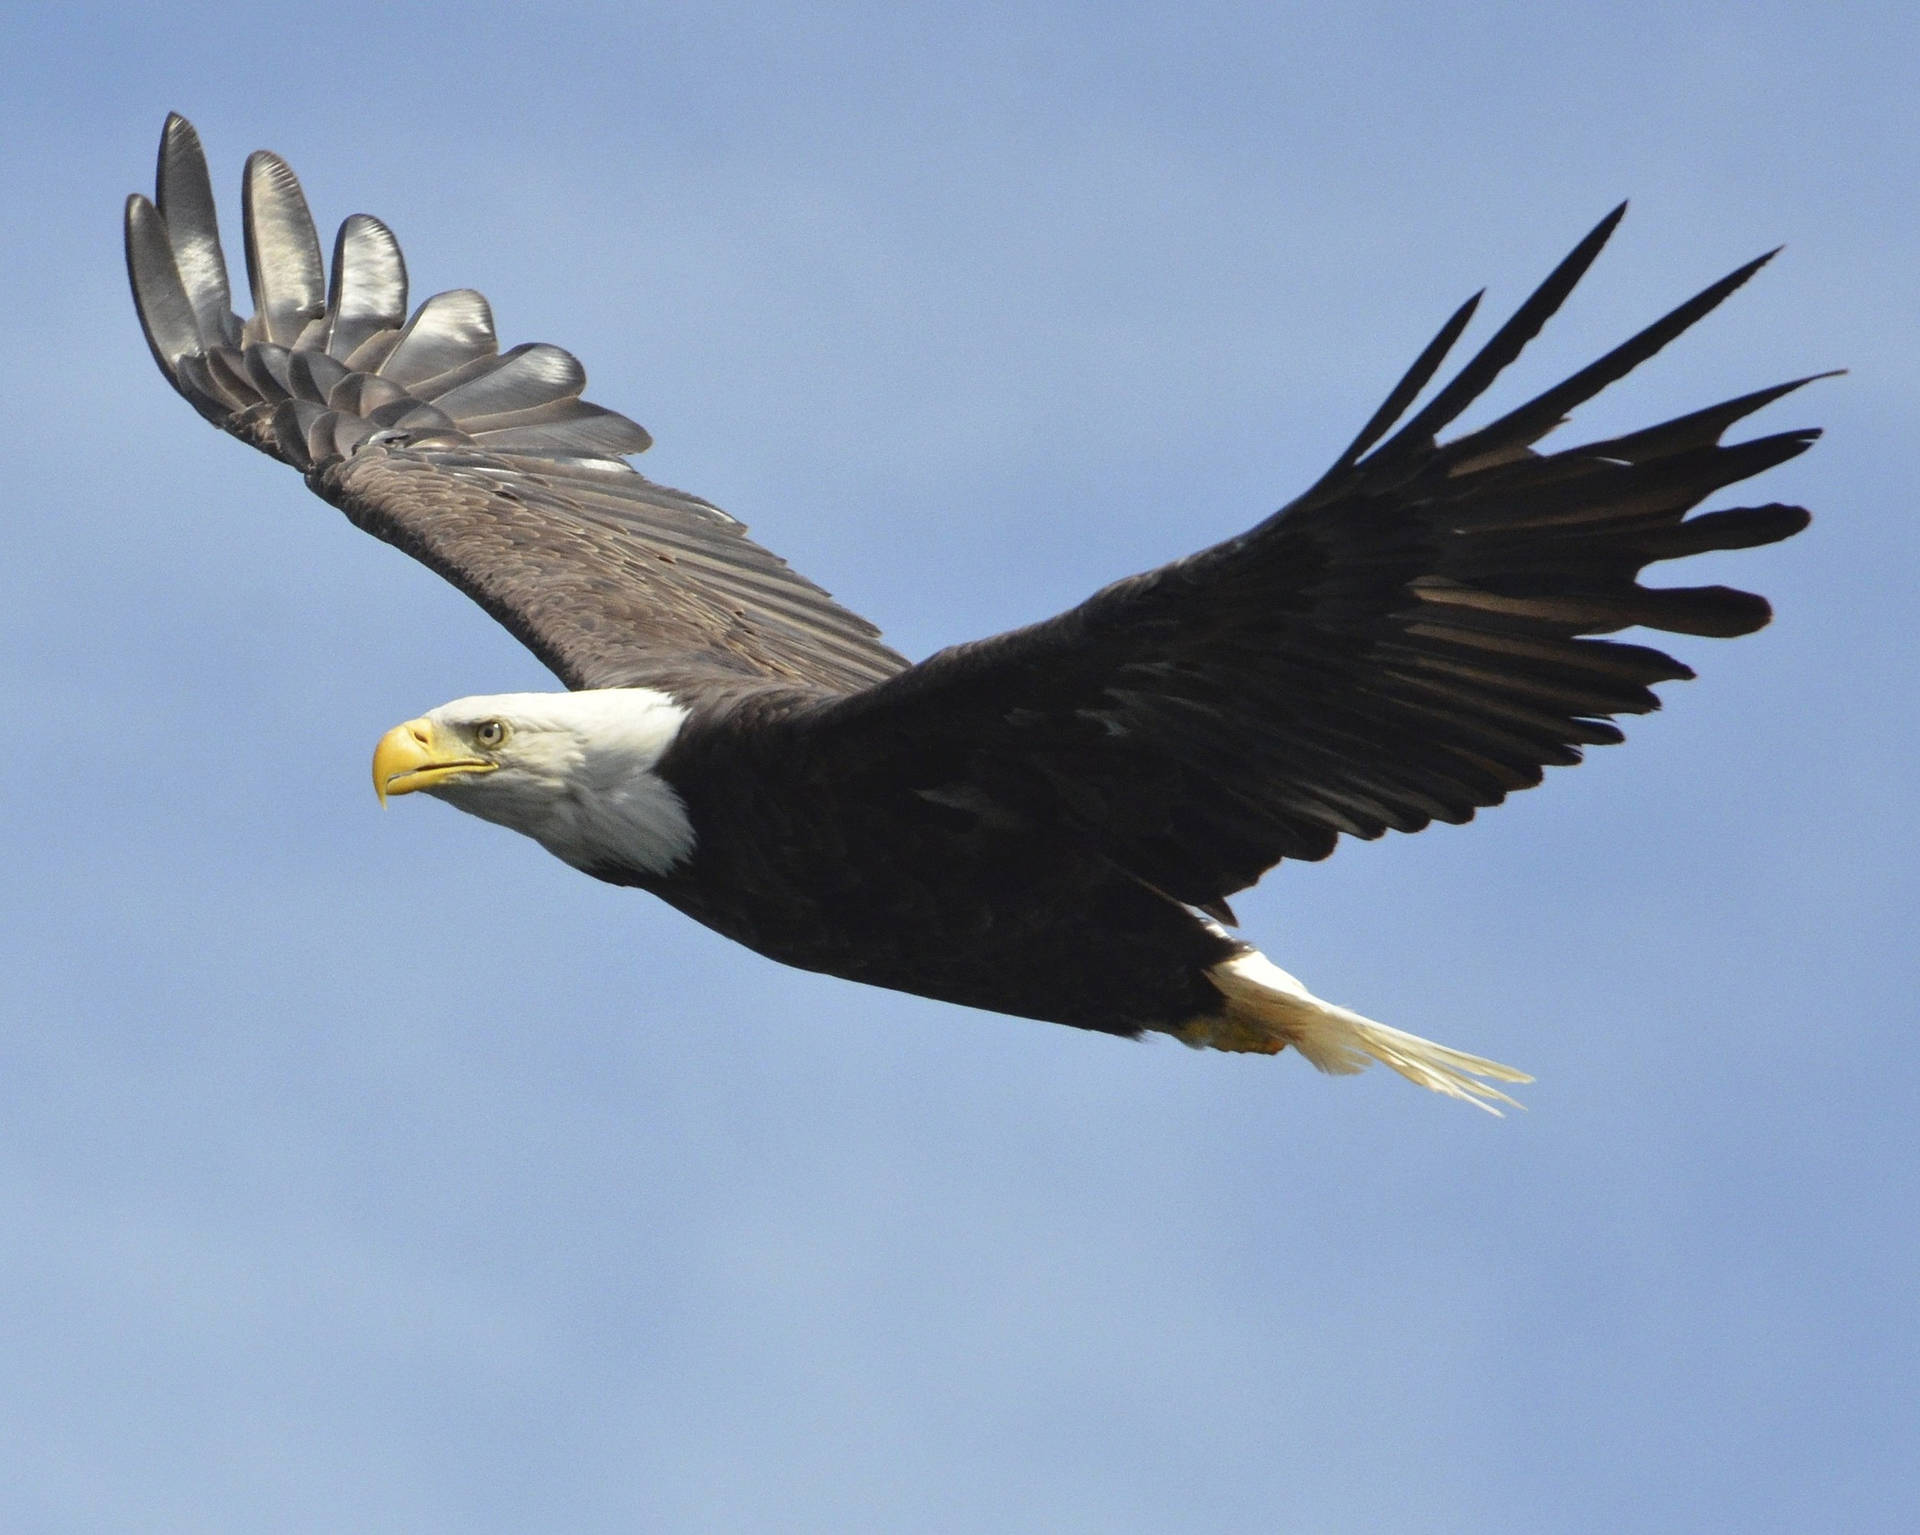 Us Eagle In The Sky Background